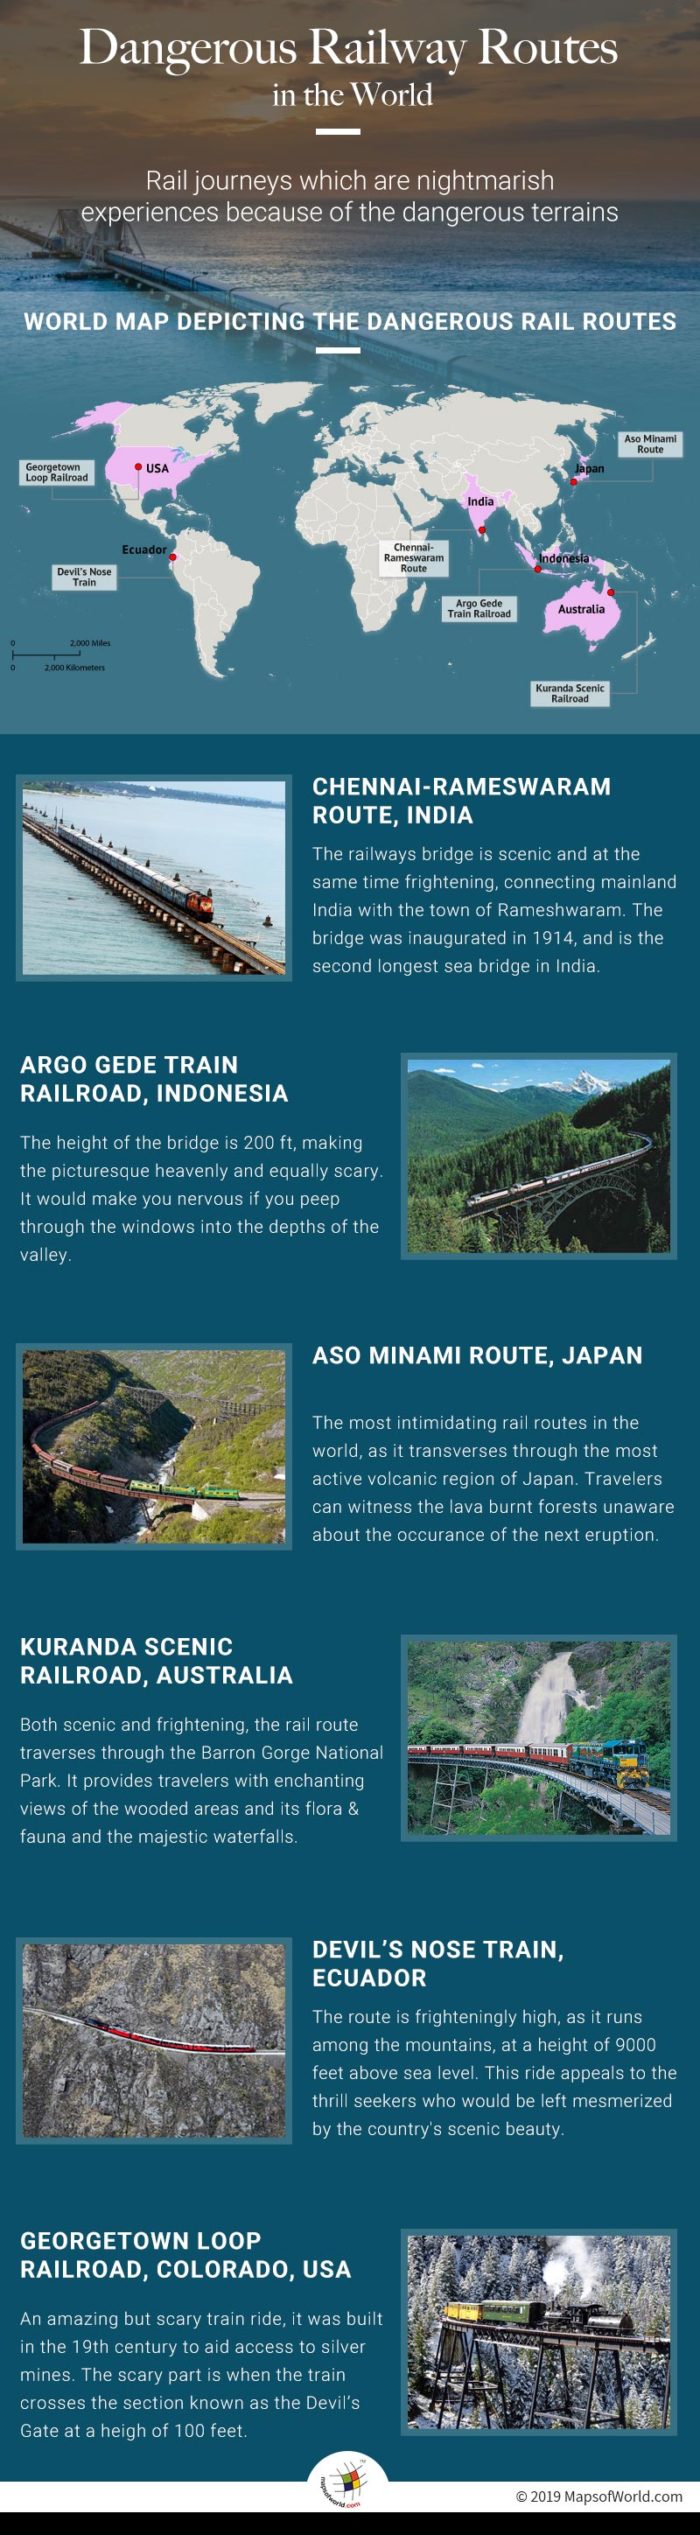 Dangerous Railway Routes in The World